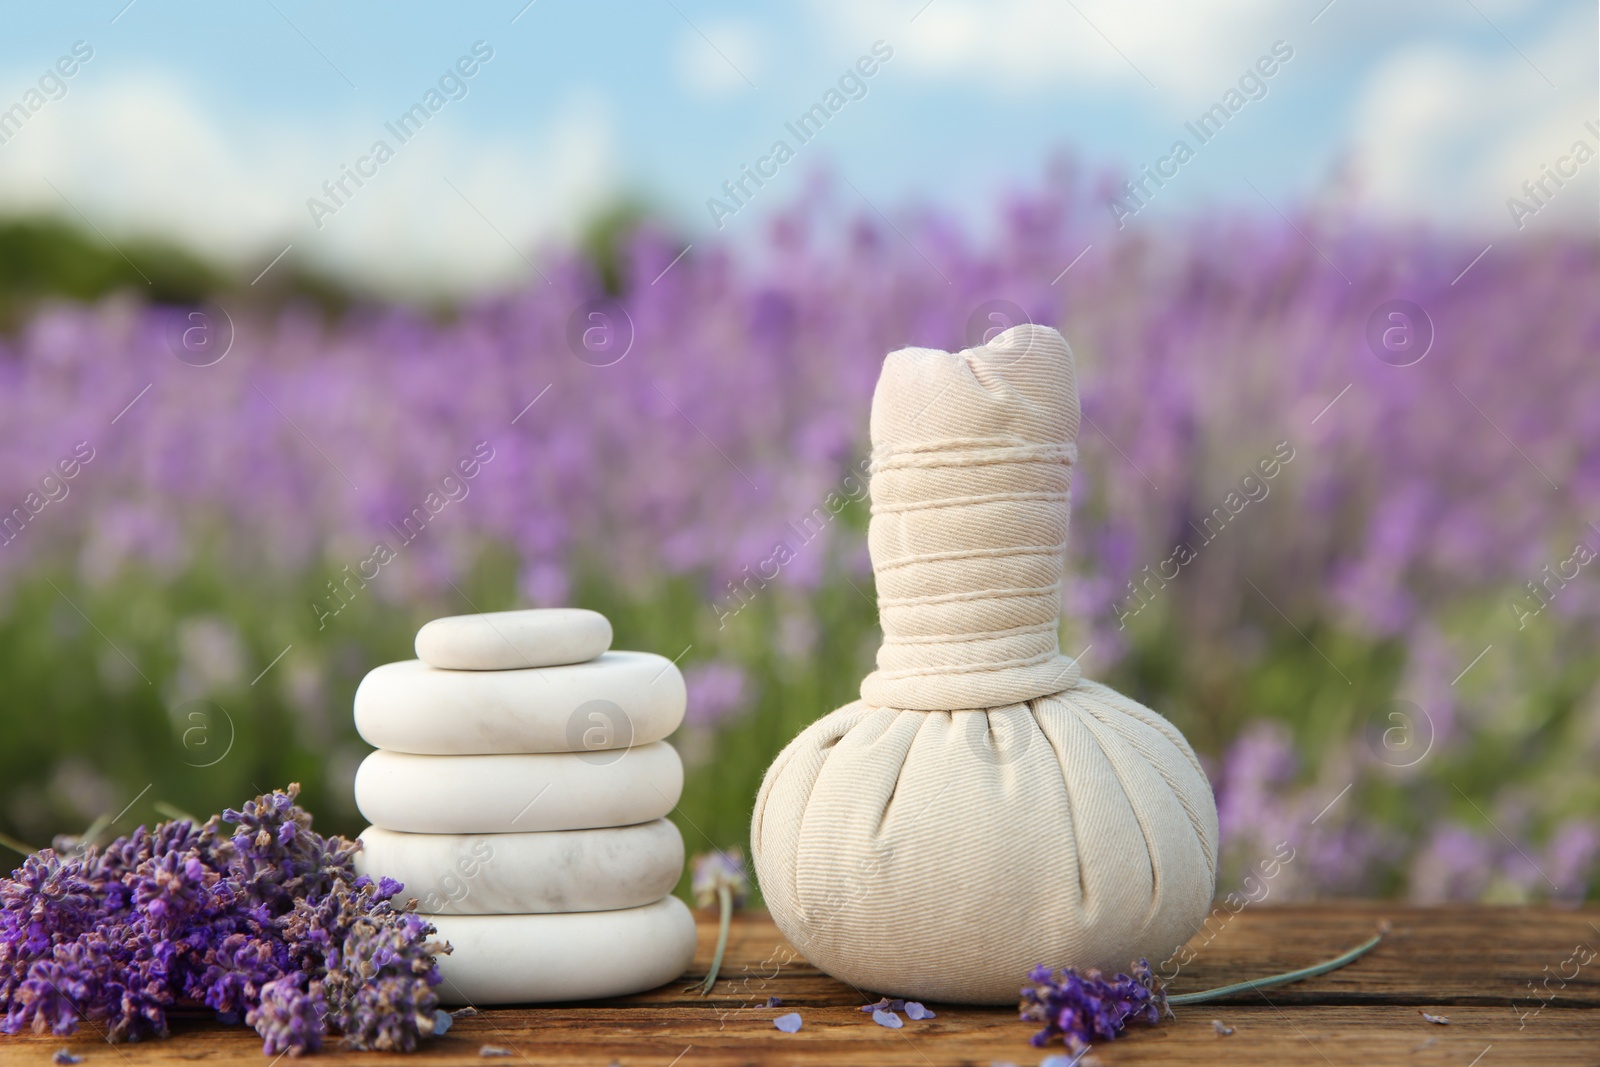 Photo of Spa stones, fresh lavender flowers and herbal bag on wooden table outdoors, closeup